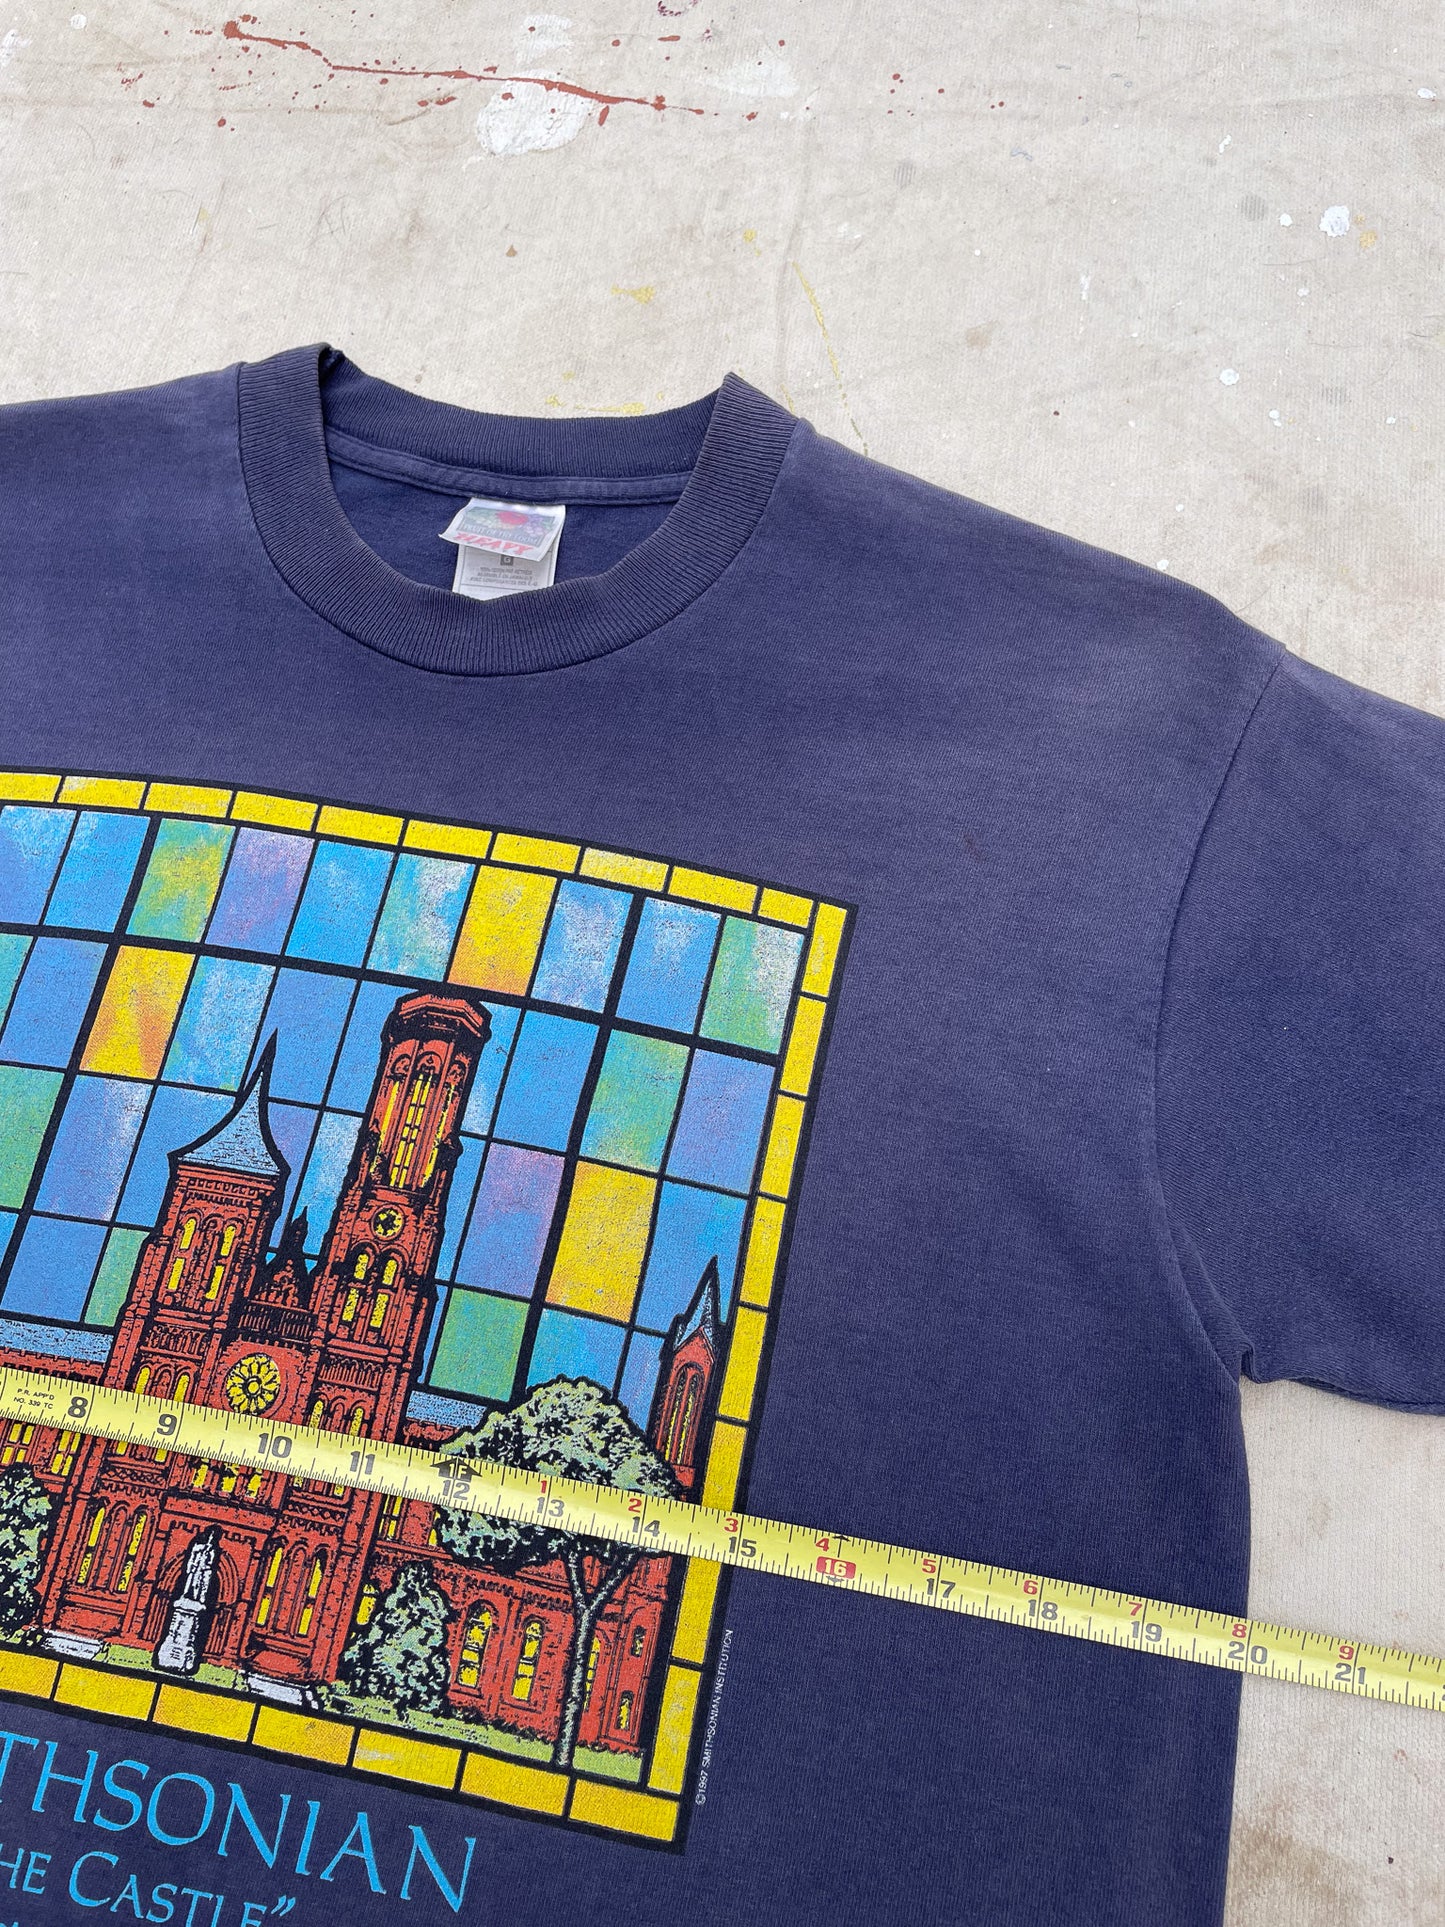 Faded Smithsonian "The Castle" T-Shirt—[L]